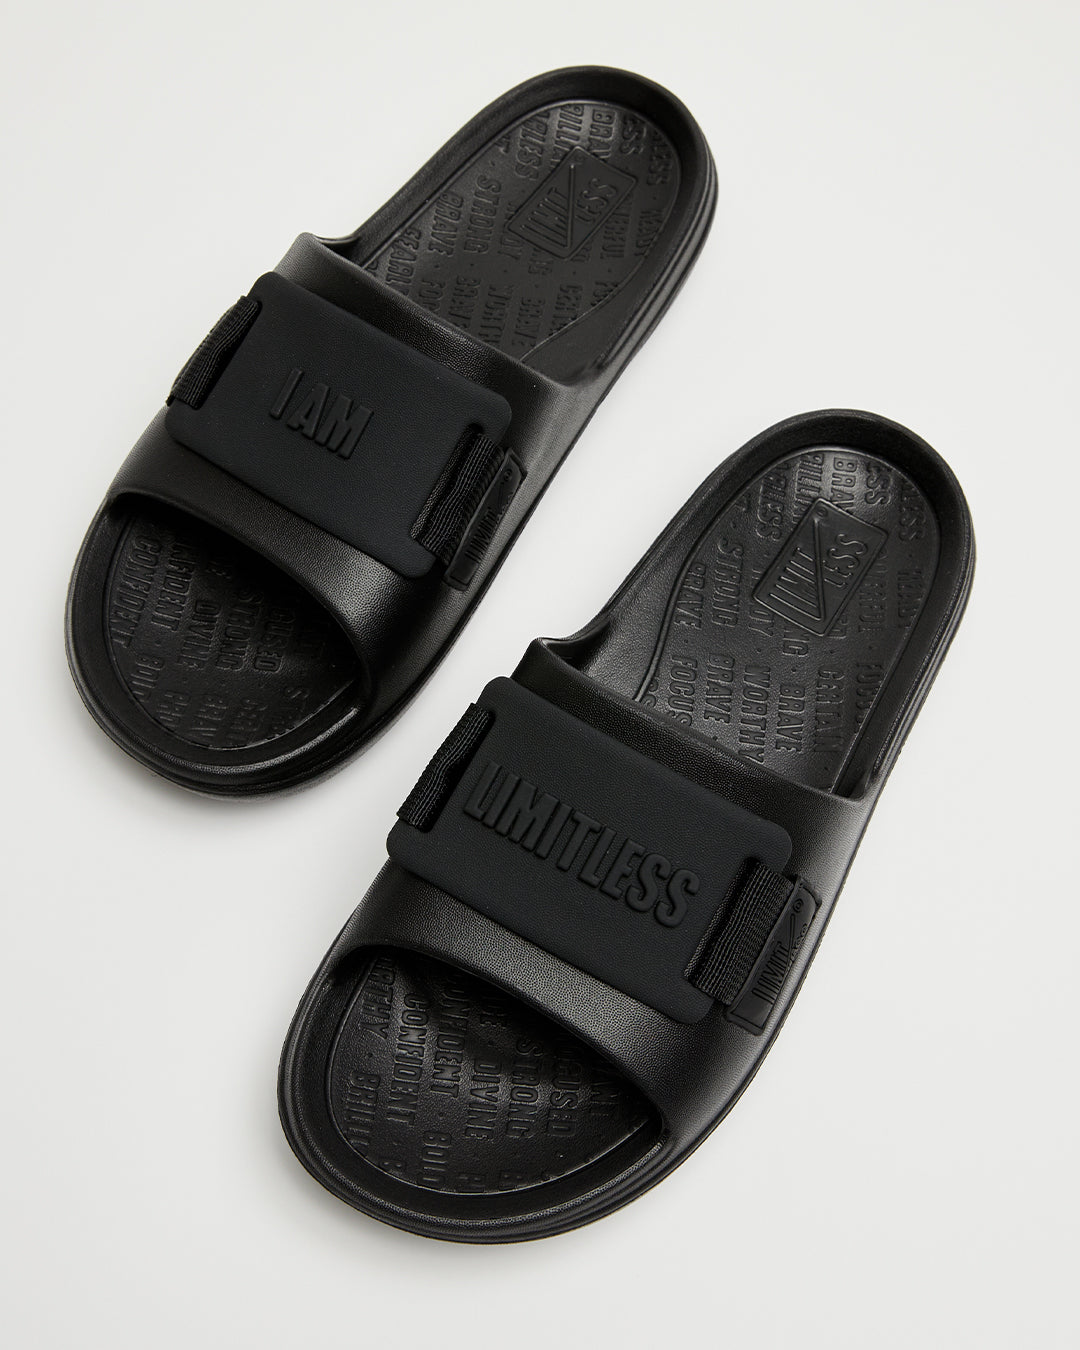 LIMITLESS SLIDES™ WITH ESSENTIAL TIBAH™ QUAD - OVEY COMEAUX HIGH SCHOOL EDITION